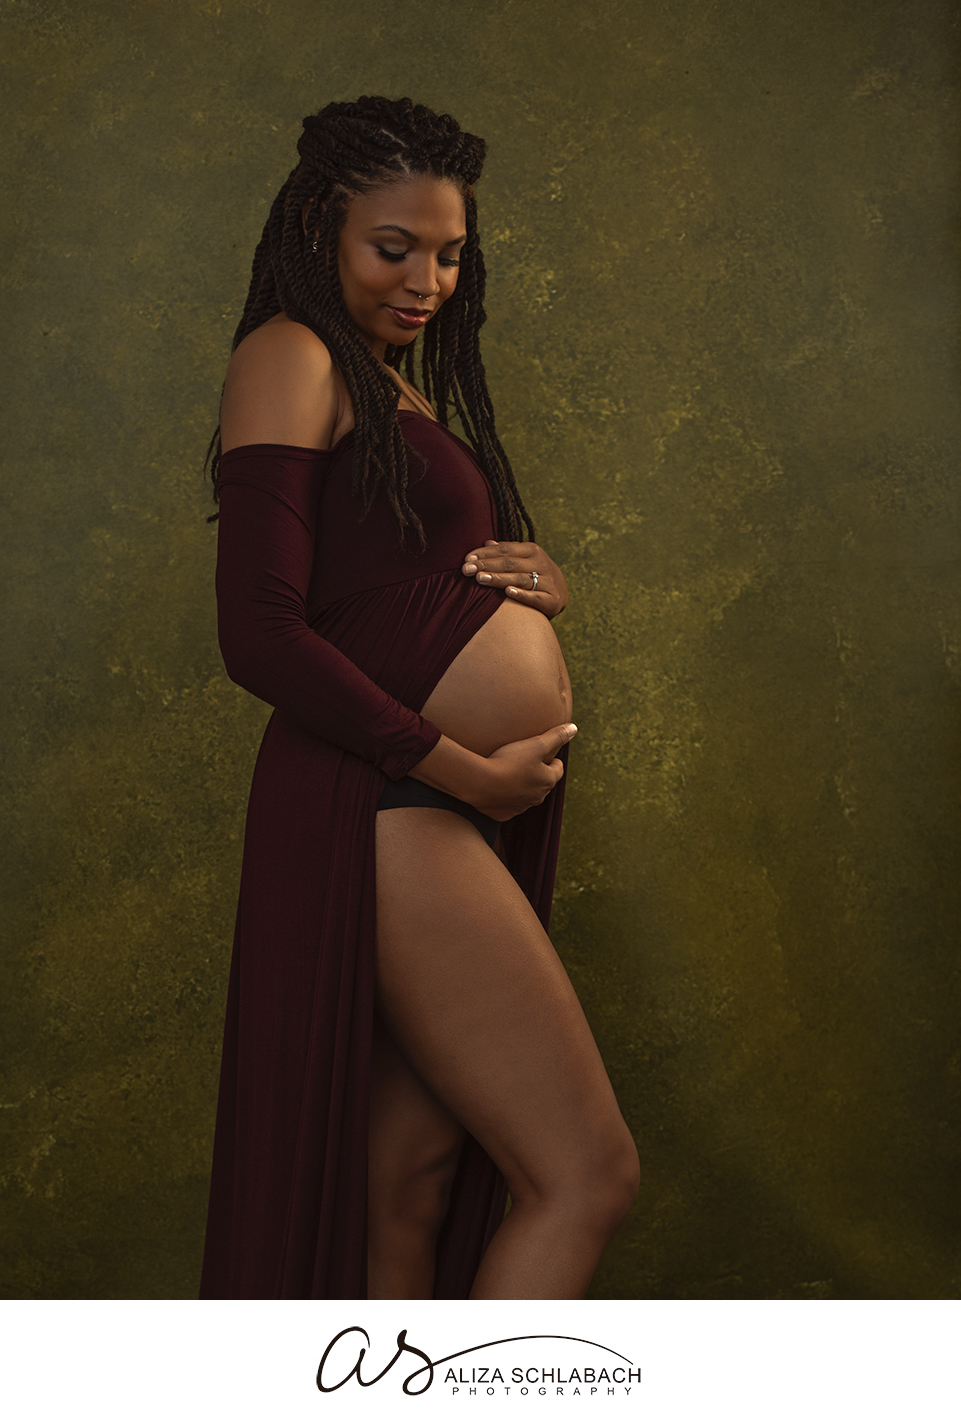 Vanity fair style photograph of a pregnant woman